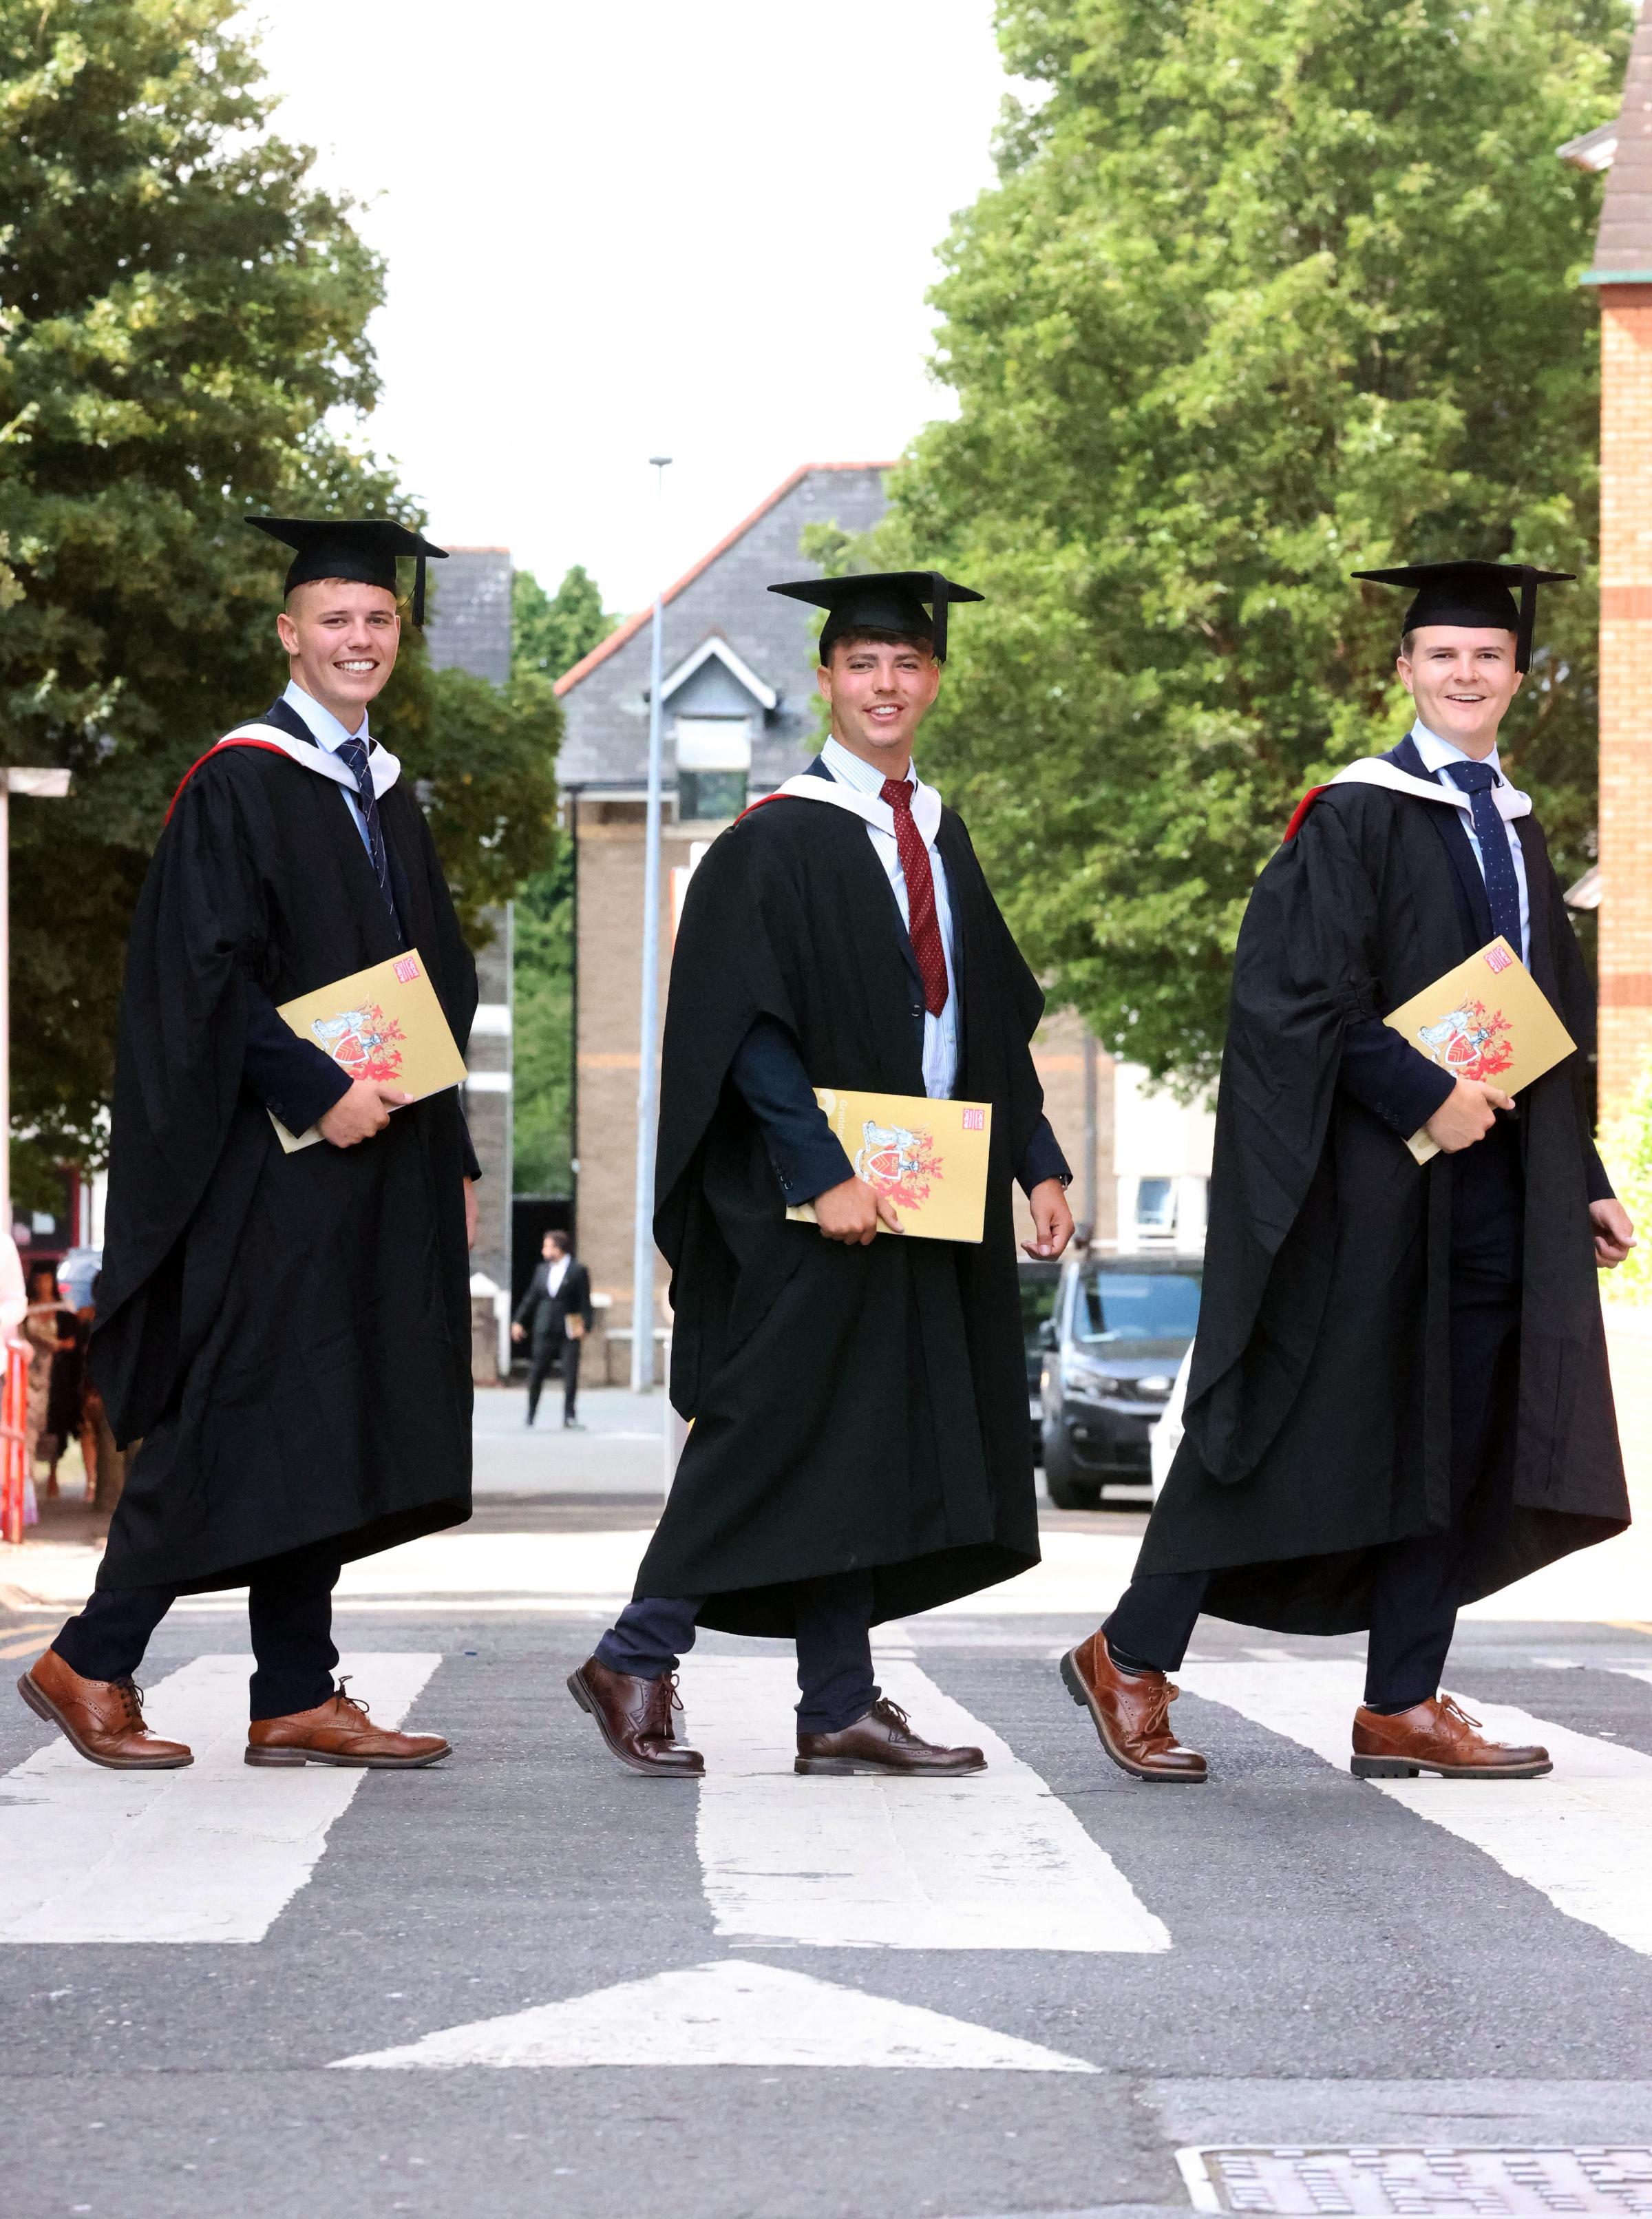 Matt, Tom and Lewis, from Castle Frome, have celebrated their graduations together. Picture: Michael Hall/Cardiff University